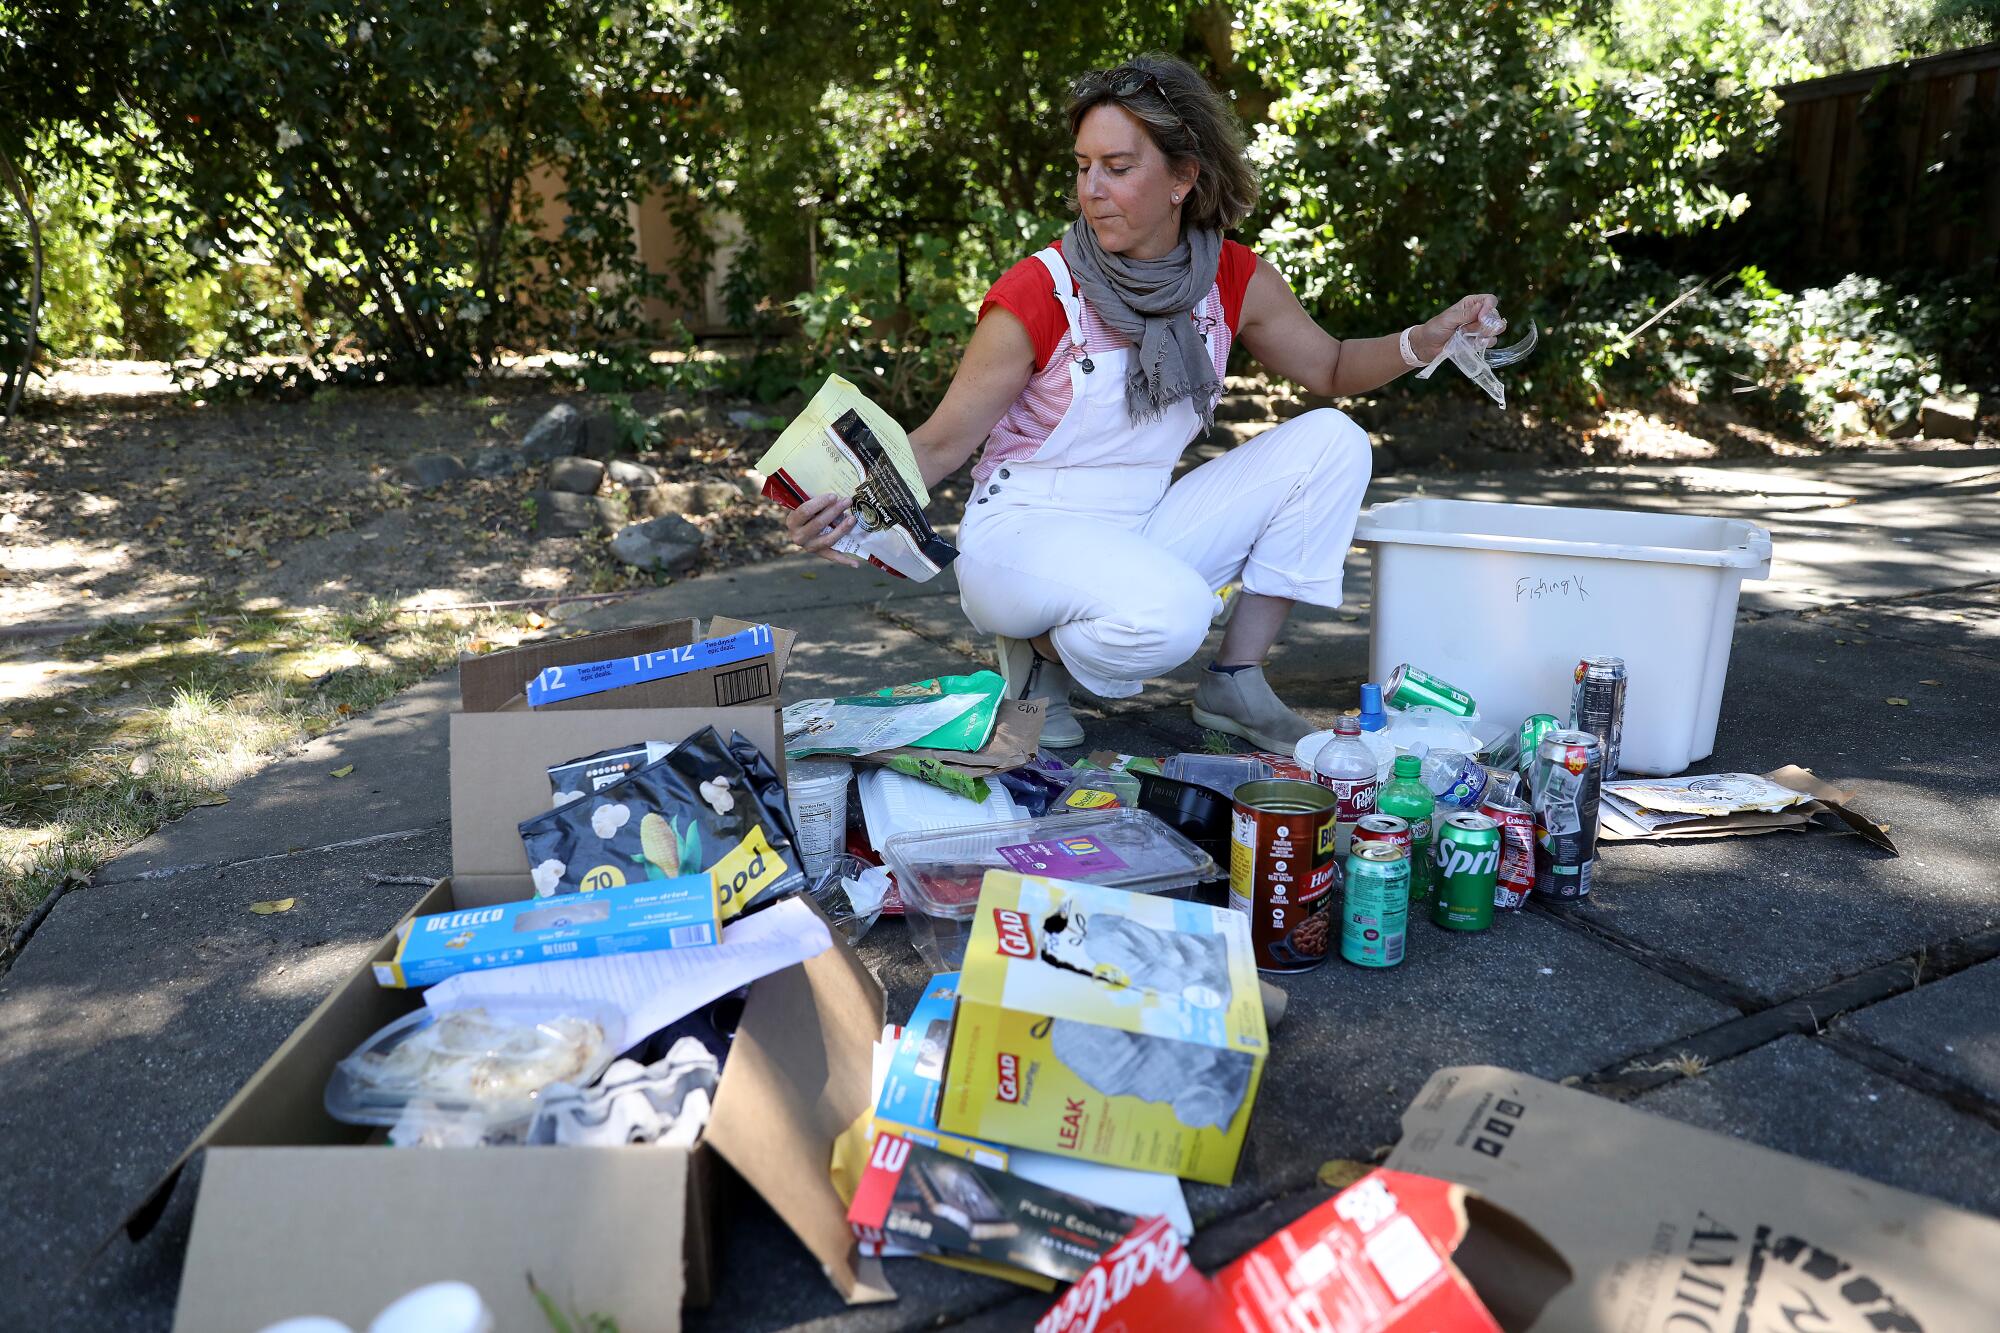 Susanne Rust wearing white overalls crouching down sorting groups of her family's trash on the ground outside.